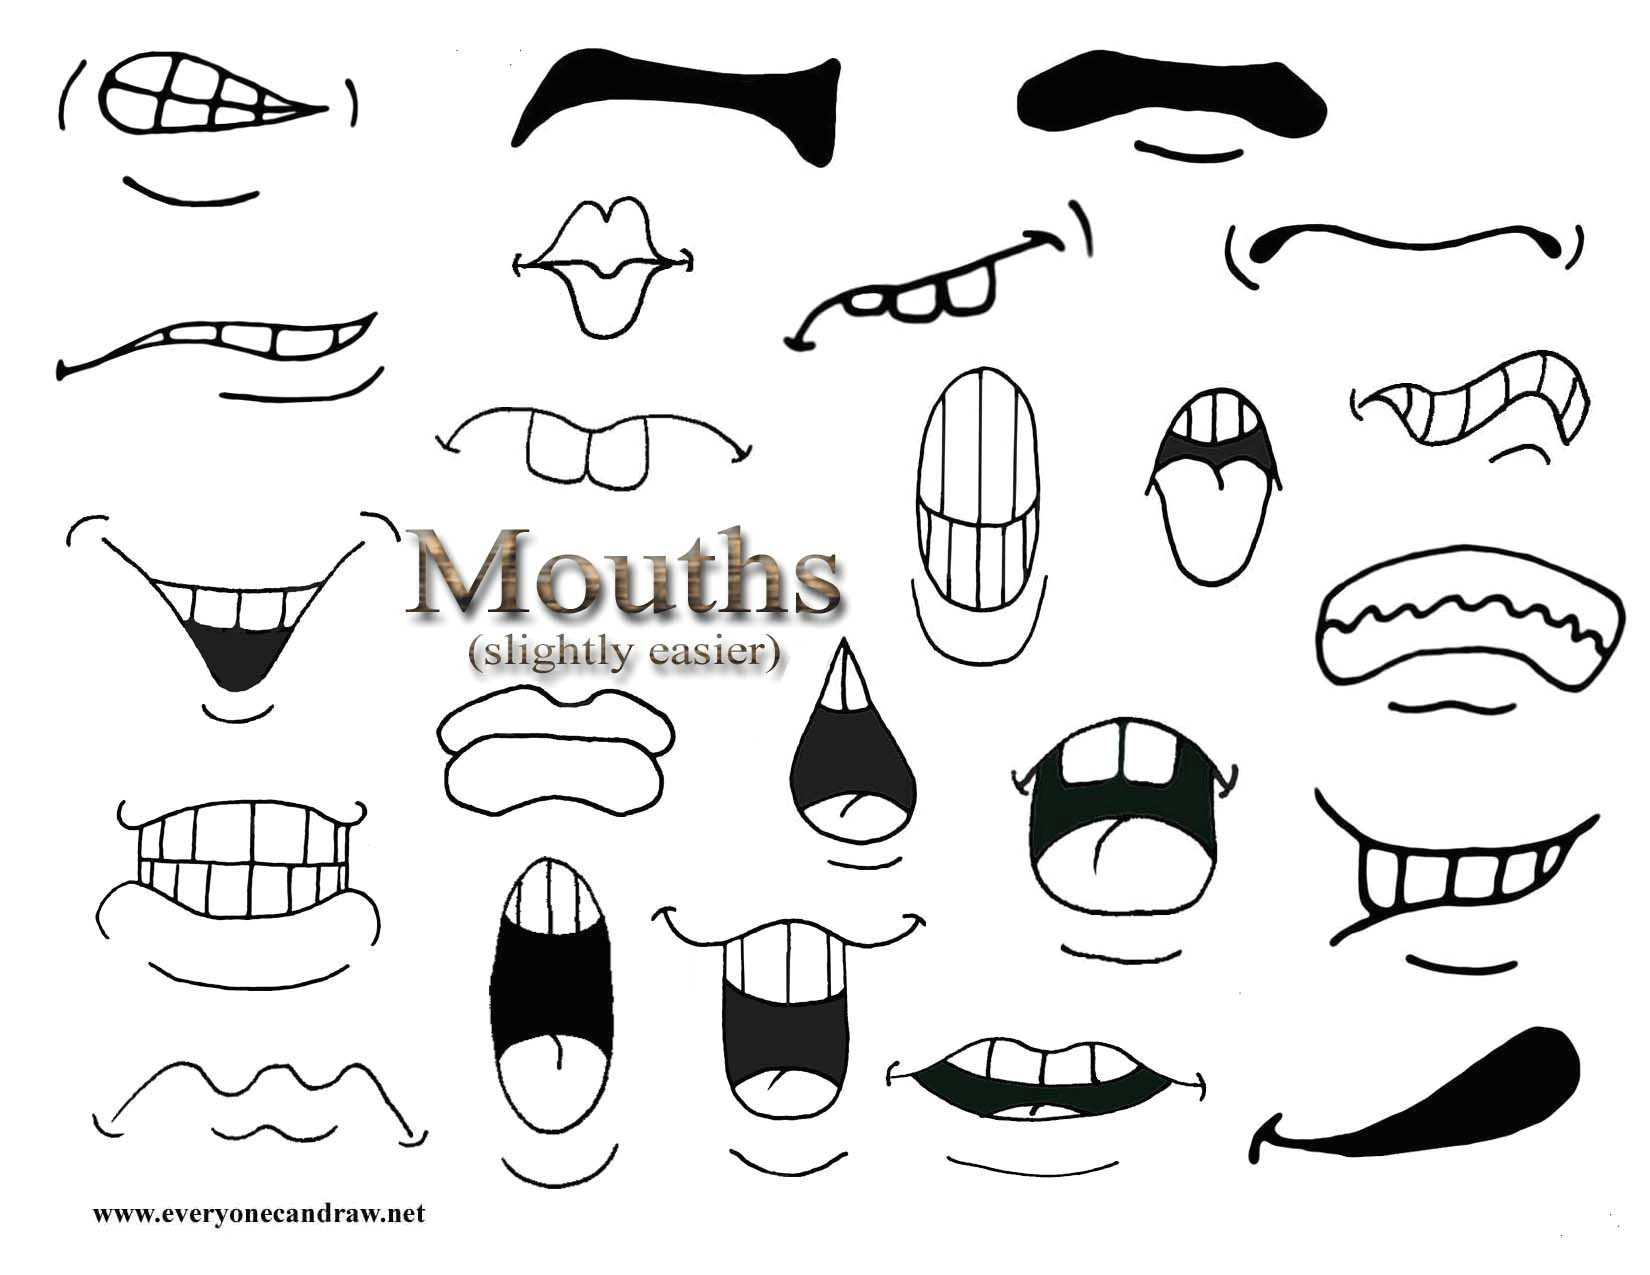 Drawing A Cartoon Mouth Pictures Of Cartoon Mouths Group with 65 Items